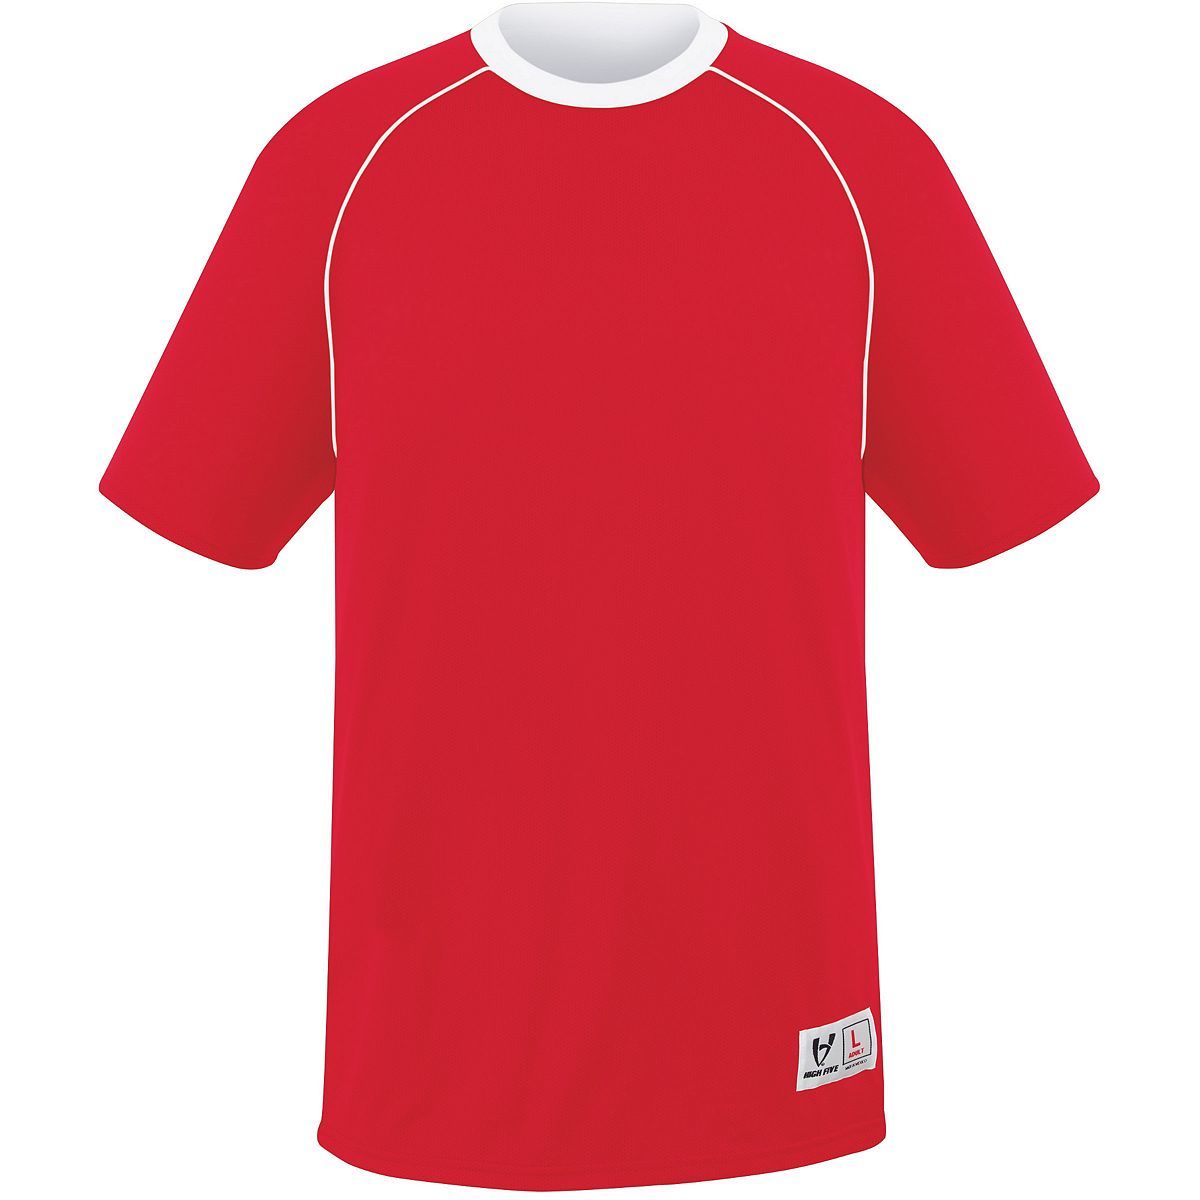 High 5 Conversion Reversible Jersey in Scarlet/White  -Part of the Adult, Adult-Jersey, High5-Products, Soccer, Shirts, All-Sports-1 product lines at KanaleyCreations.com